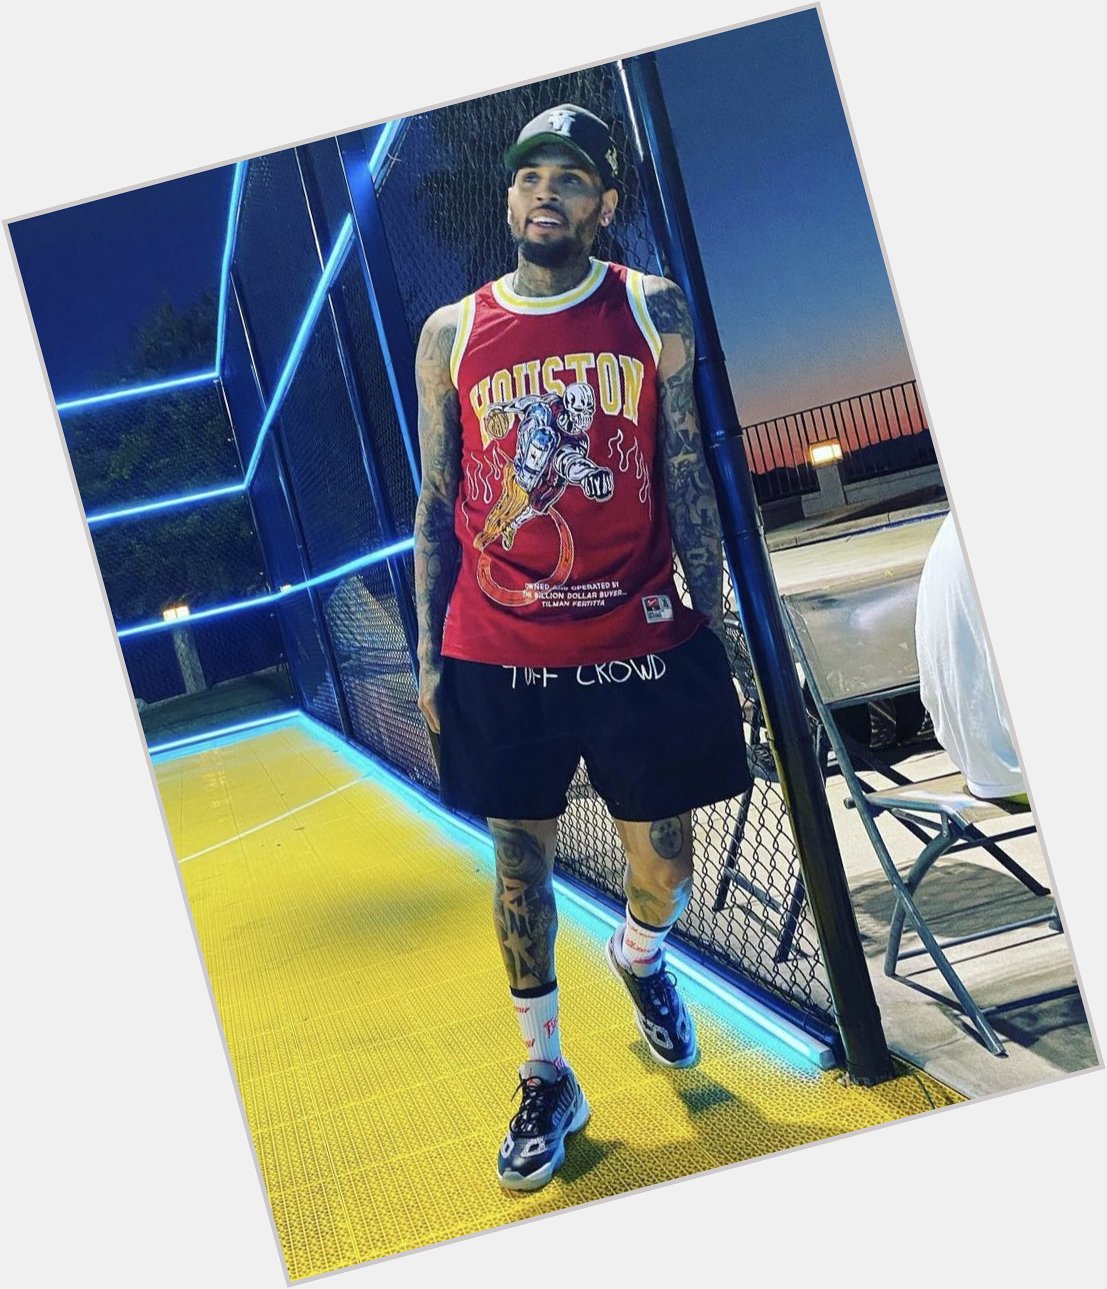 Chris Brown turned 34 today 

Happy Birthday Chris Brown 